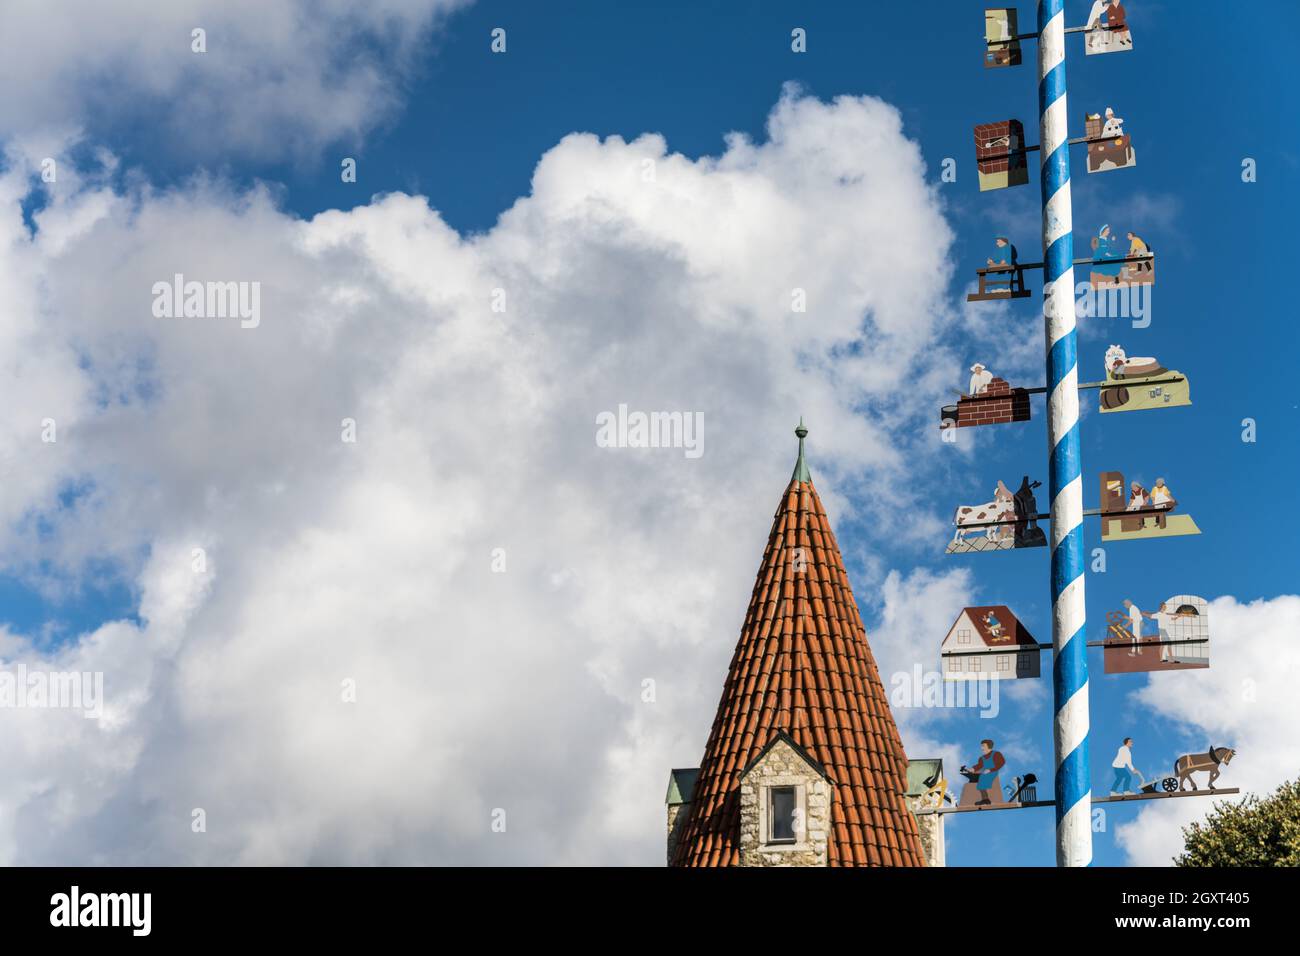 the white-blue sky over Bavaria, so typical and beautiful Stock Photo